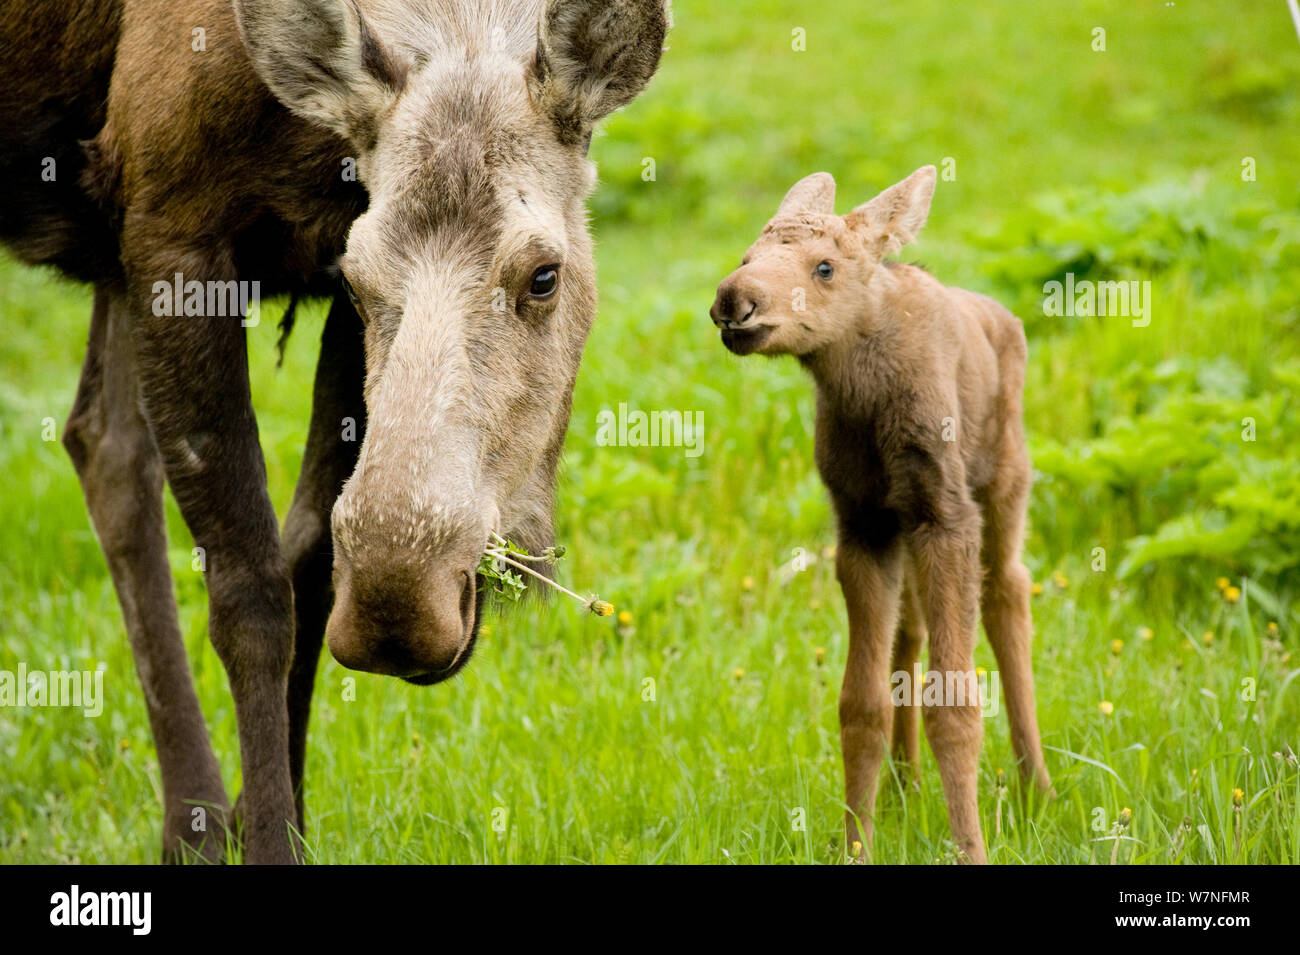 Moose (Alces alces) cow with a newborn calf. Tony Knowles Coastal Trail, Anchorage, south-central Alaska, May. Stock Photo